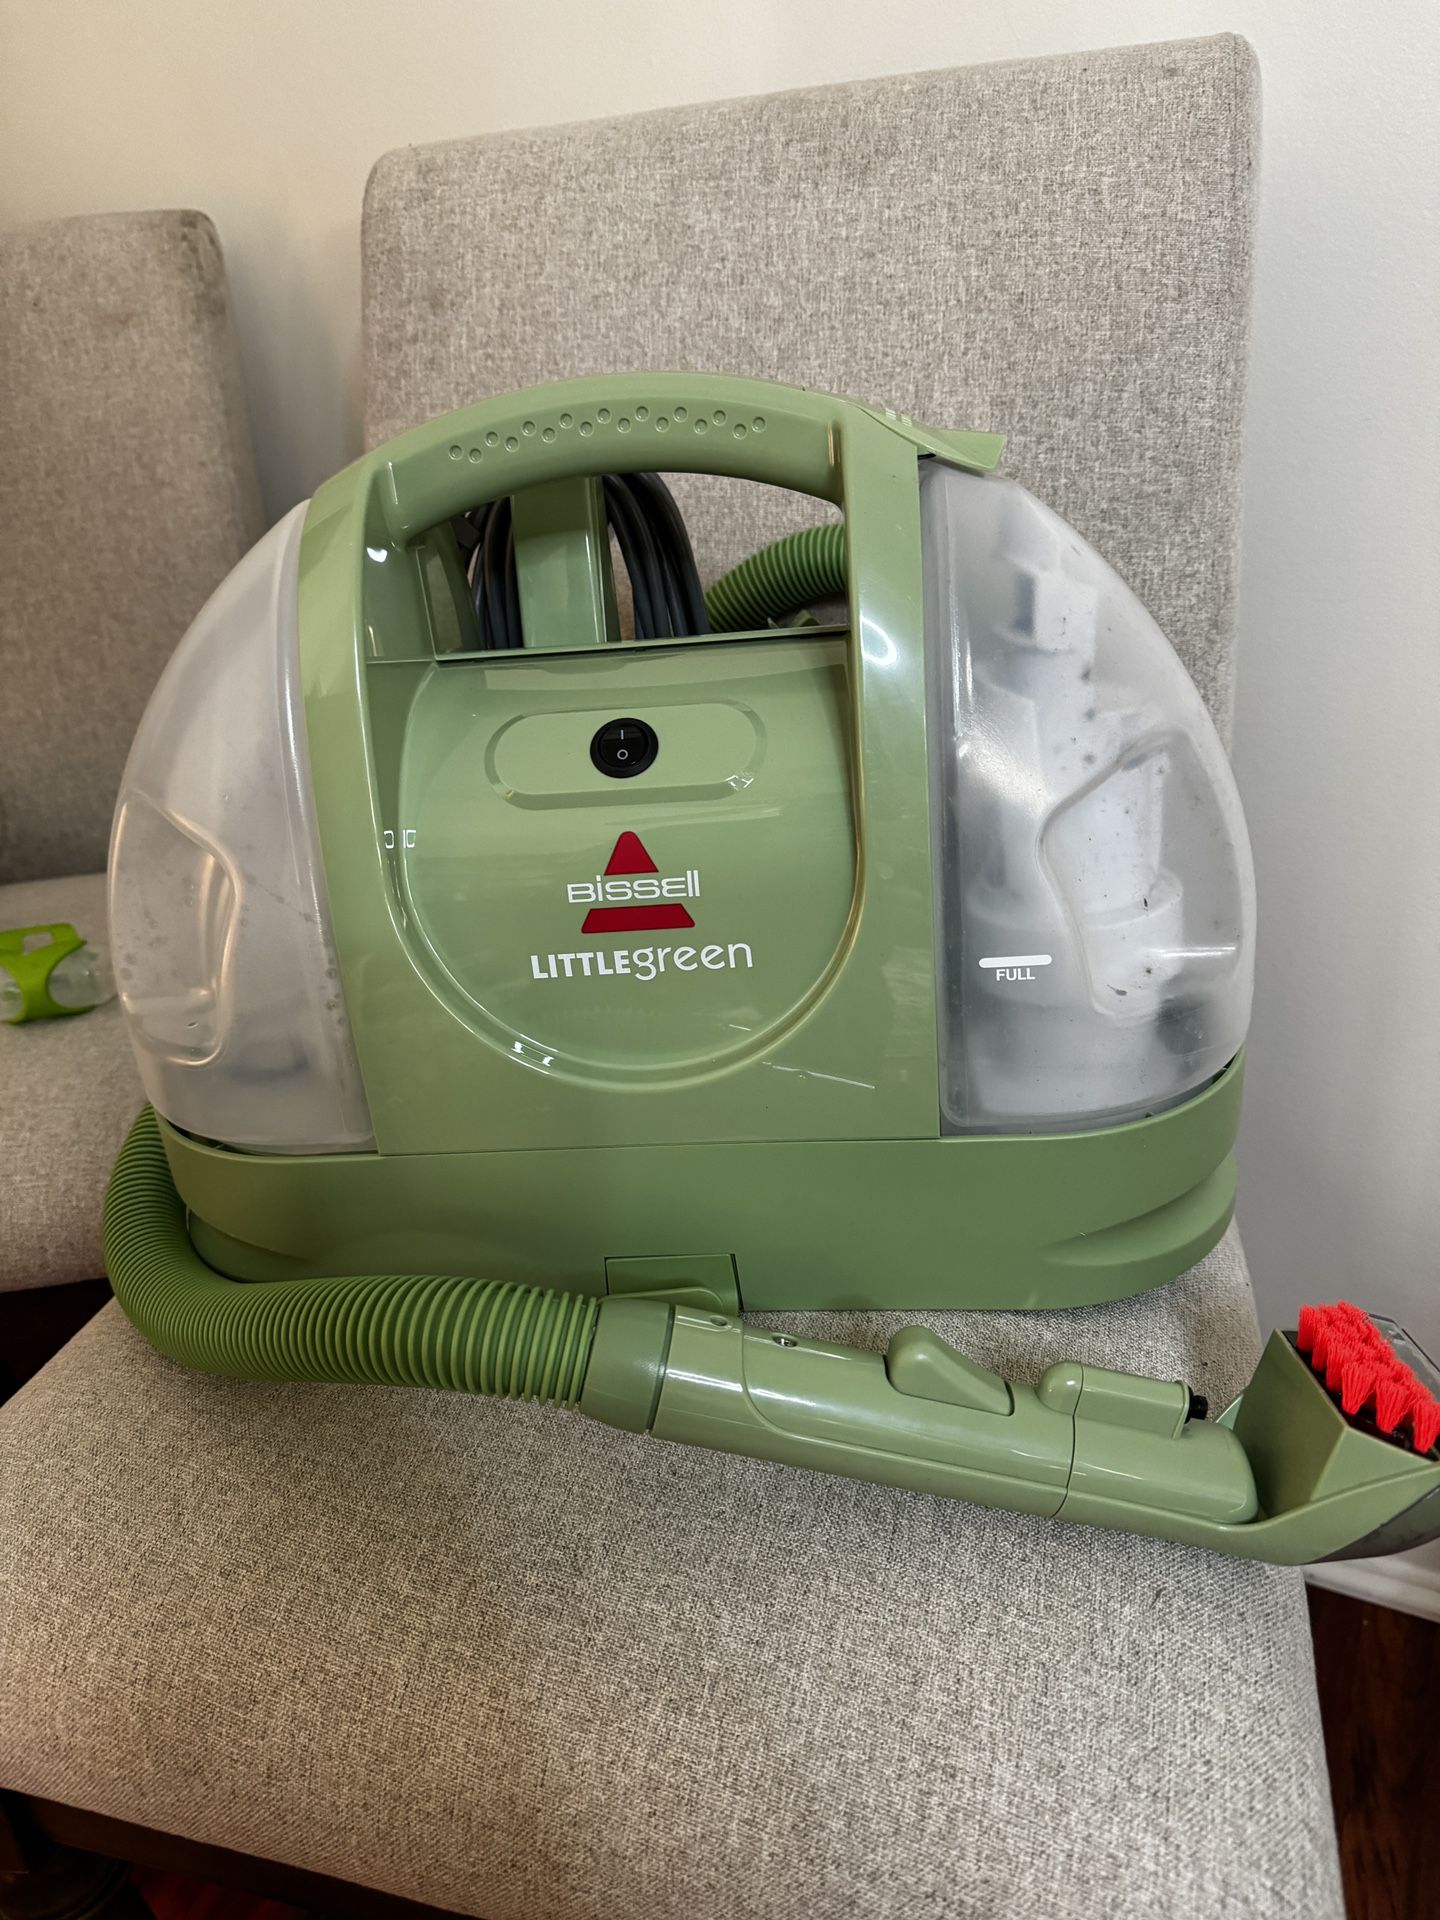 Bissell Little Green Used/tested/cleaned